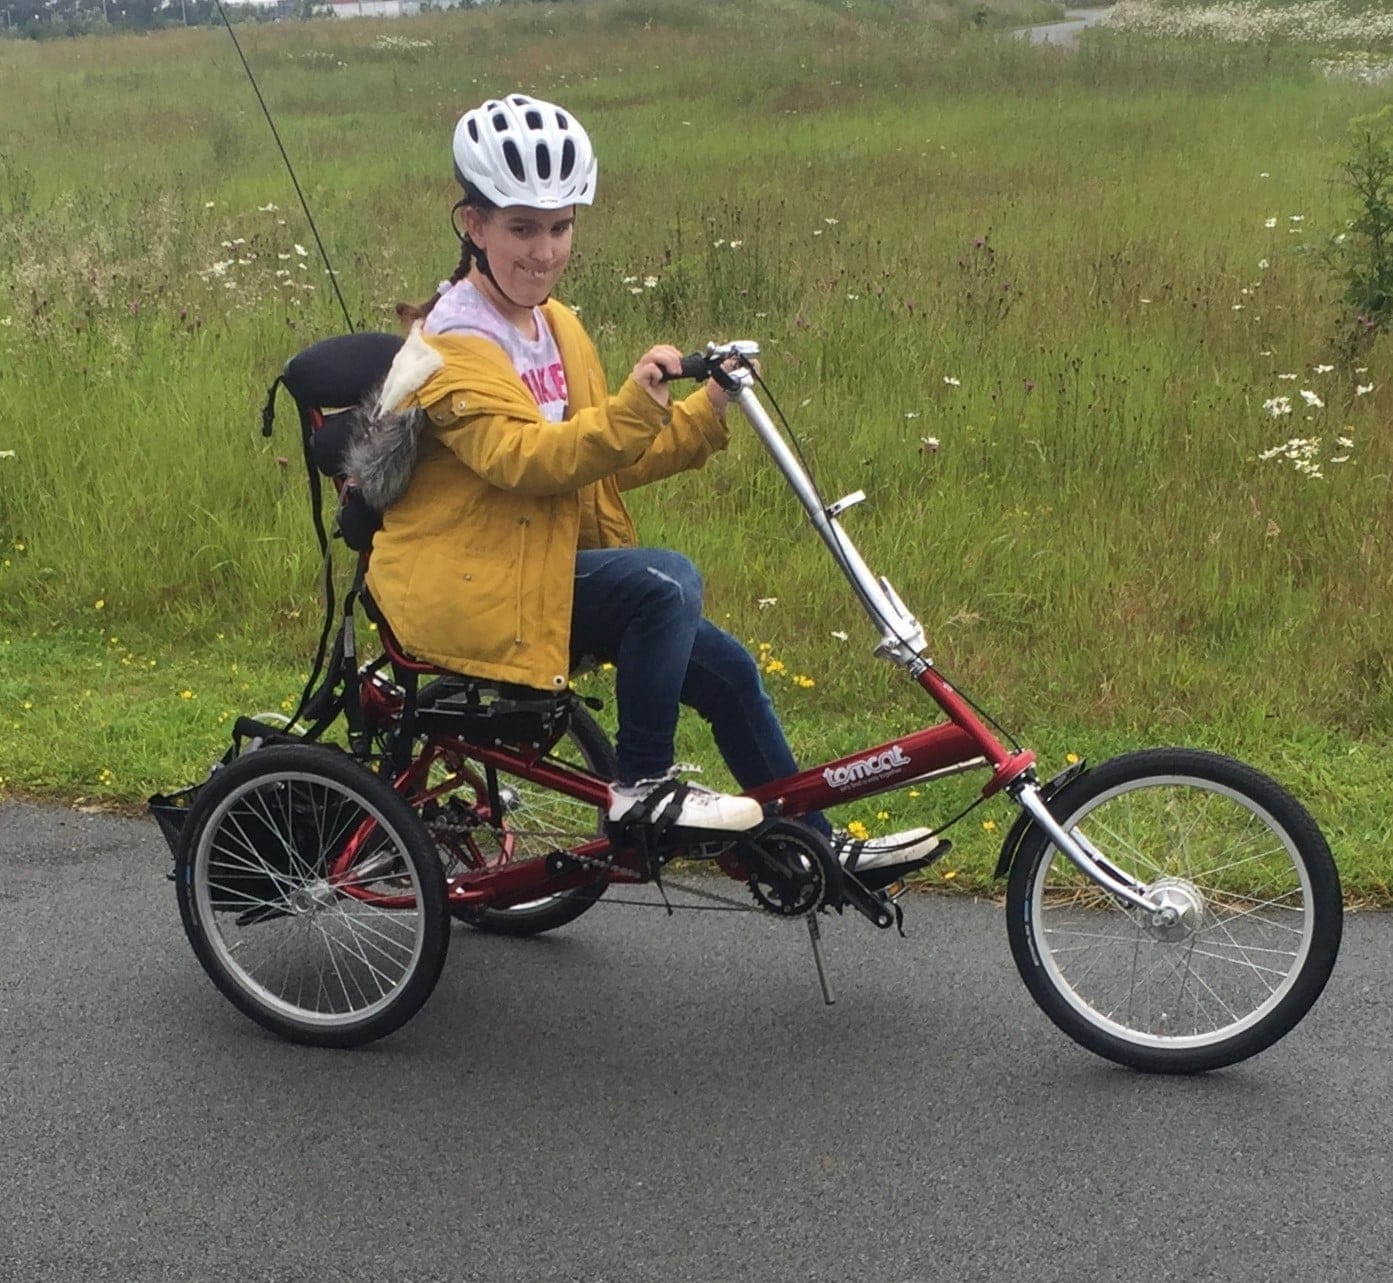 Riding adapted cycle in the park